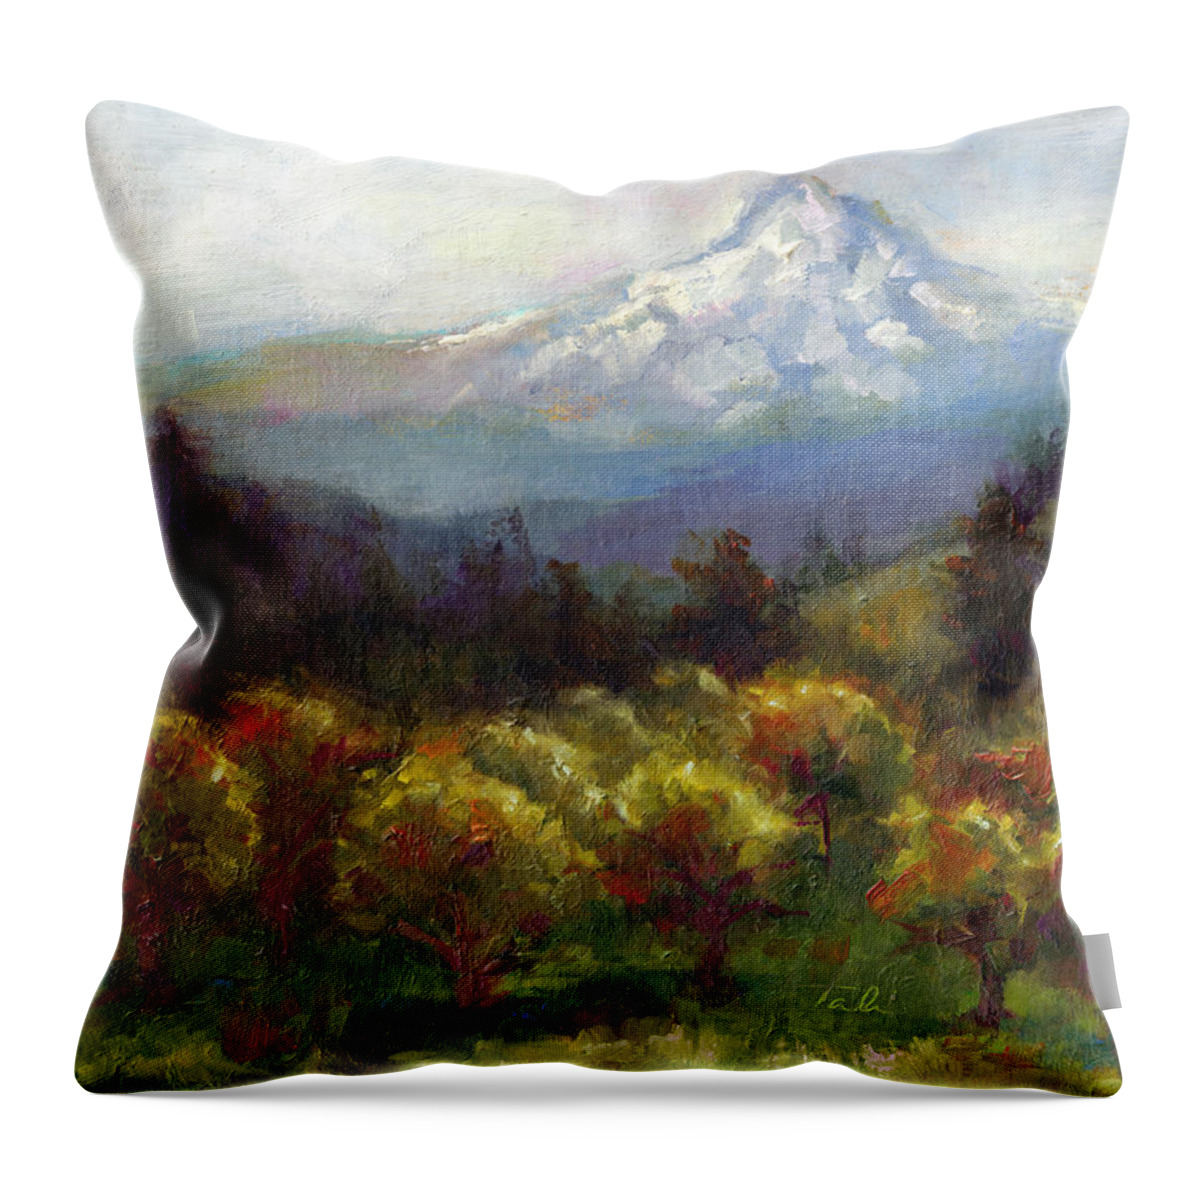 Mt. Throw Pillow featuring the painting Beyond the Orchards - Mt. Hood by Talya Johnson